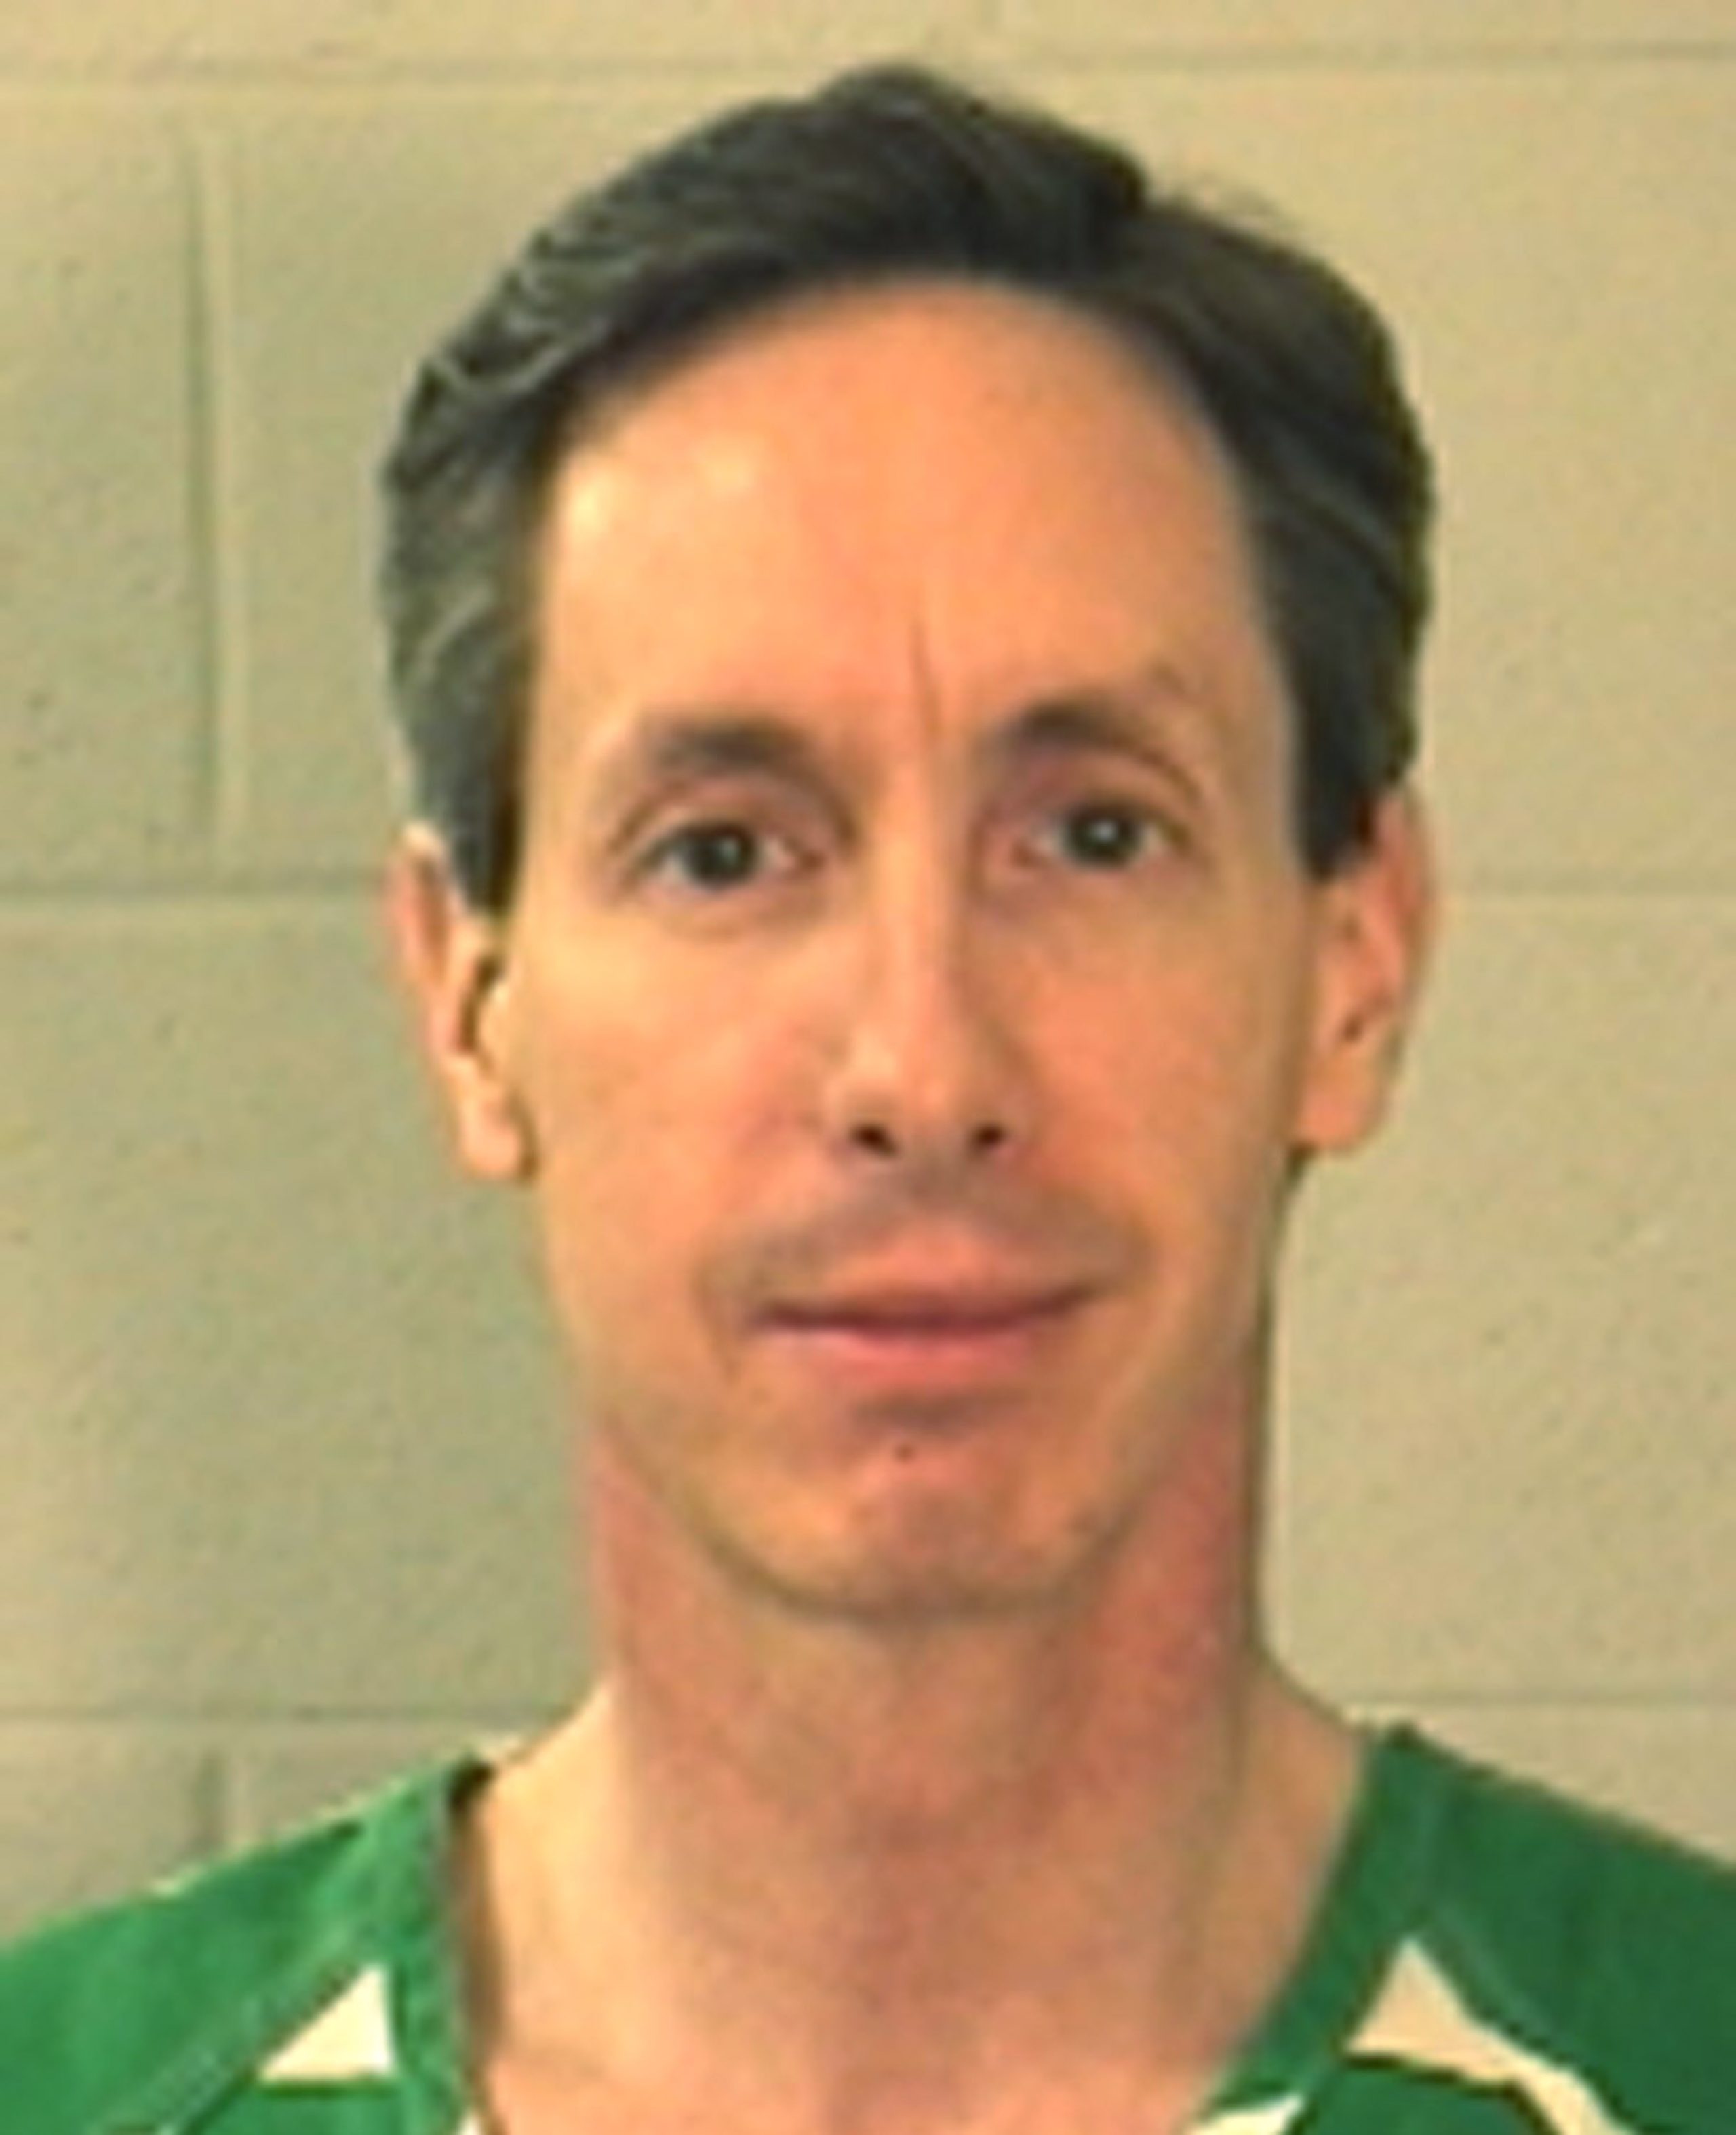 HURRICANE, UT - SEPTEMBER 5: In this photo provided by the Washington County Sheriff's Office , Warren Steed Jeffs, the head of a polygamous Mormon sect, is seen in a booking photo September 5, 2006 at the Purgatory Correctional Facility in Hurricane, Utah after he was extradicted from Nevada. Jeffs is facing two felony rape charges in Utah in connection with an arranged marriage of an underage girl to an adullt man. (Photo by Washington County Sheriff via Getty Images)